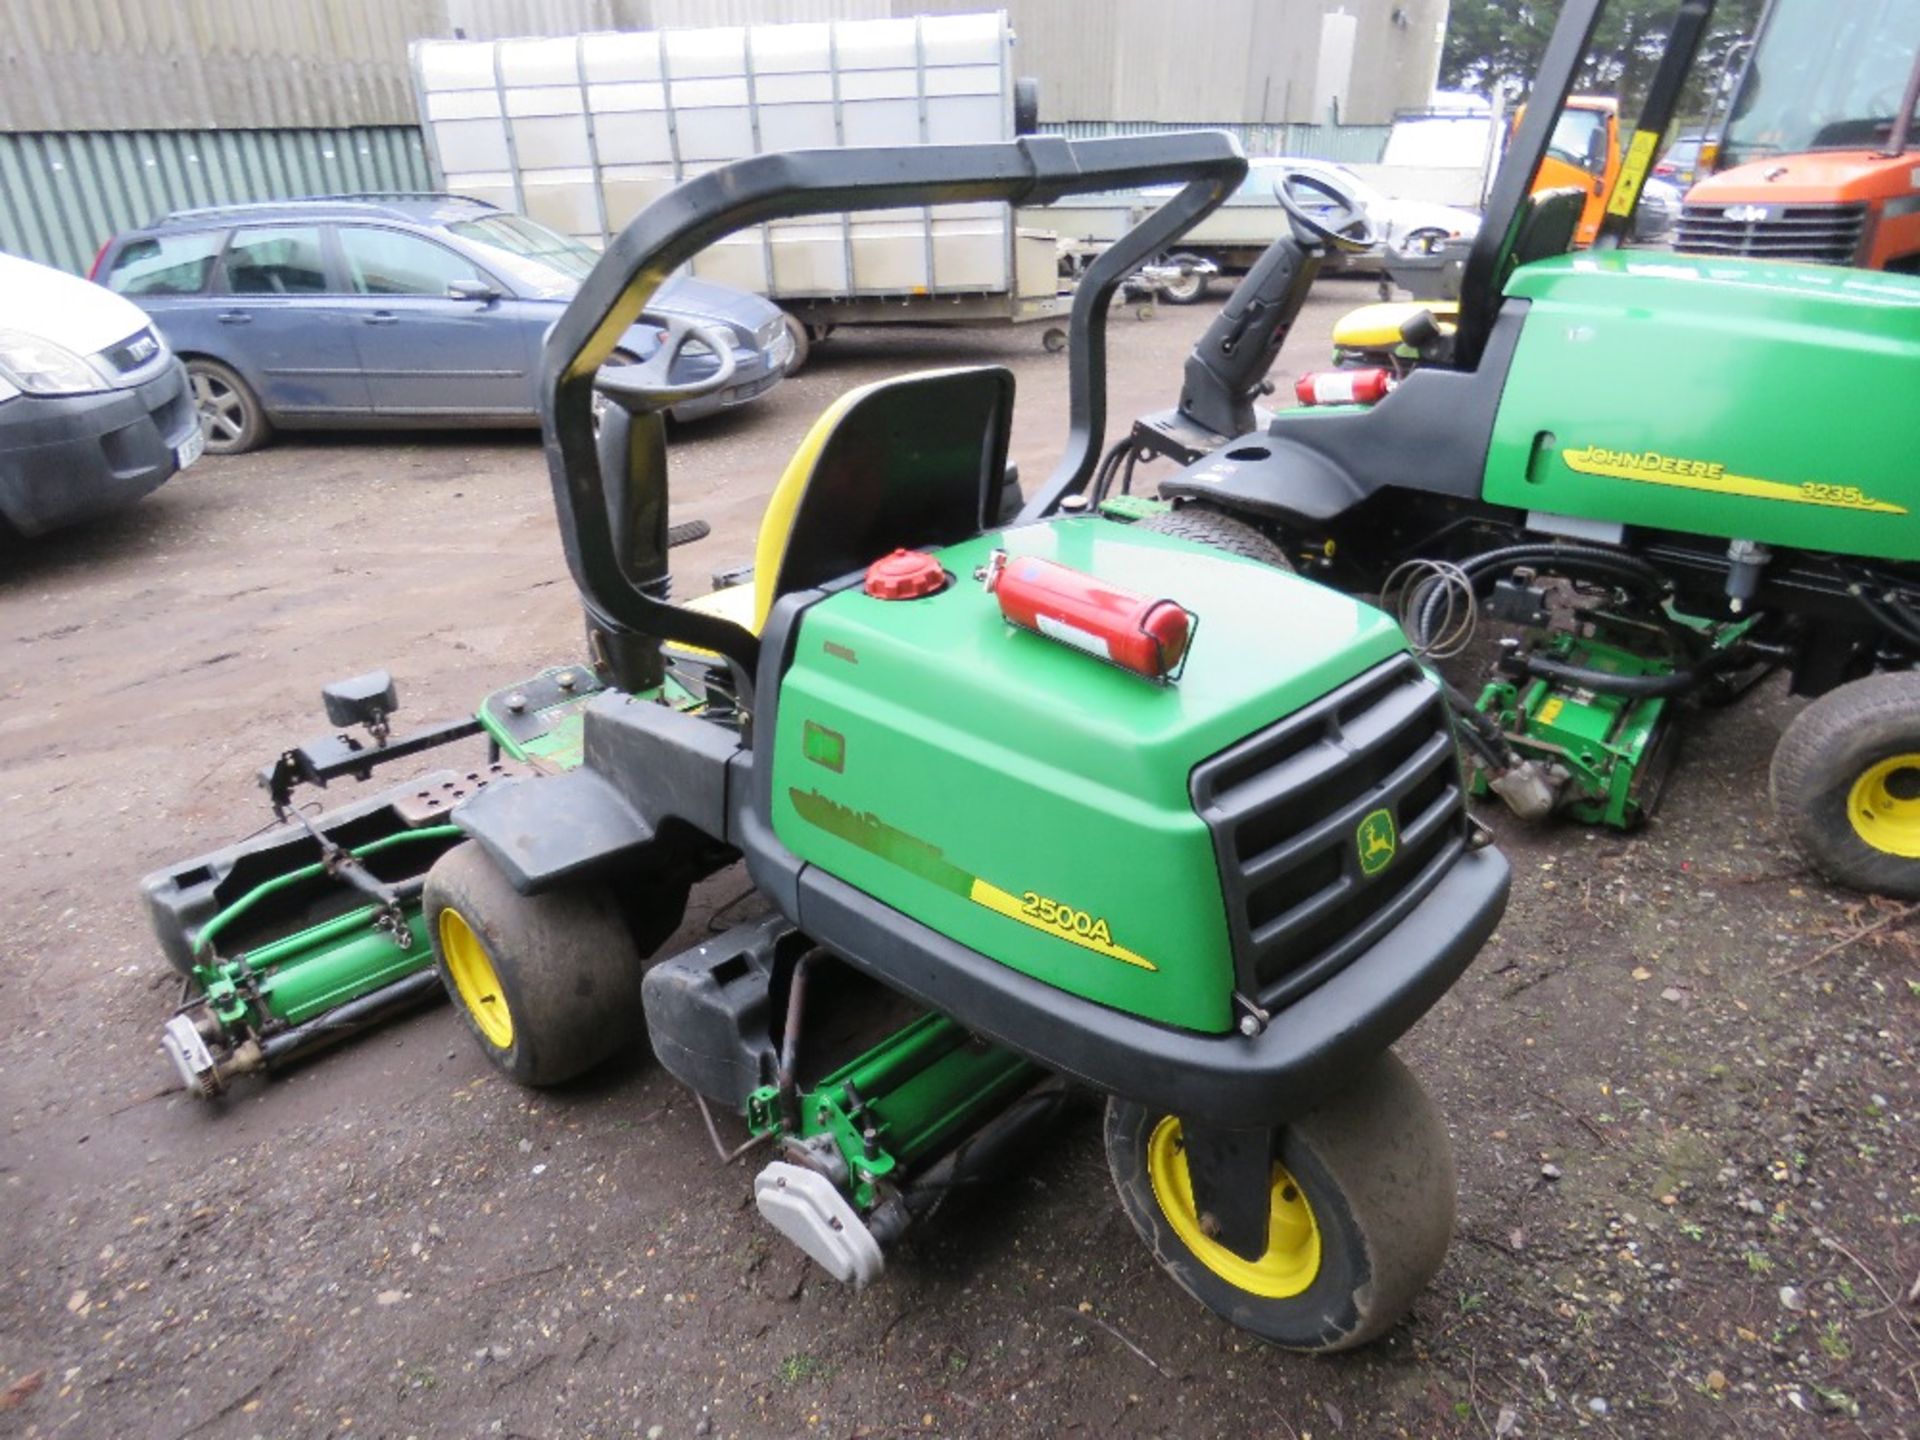 JOHN DEERE 2500A 3 WHEELED GREENS MOWER WITH COLLECTION BOXES. YEAR 2005 BUILD. - Image 3 of 8